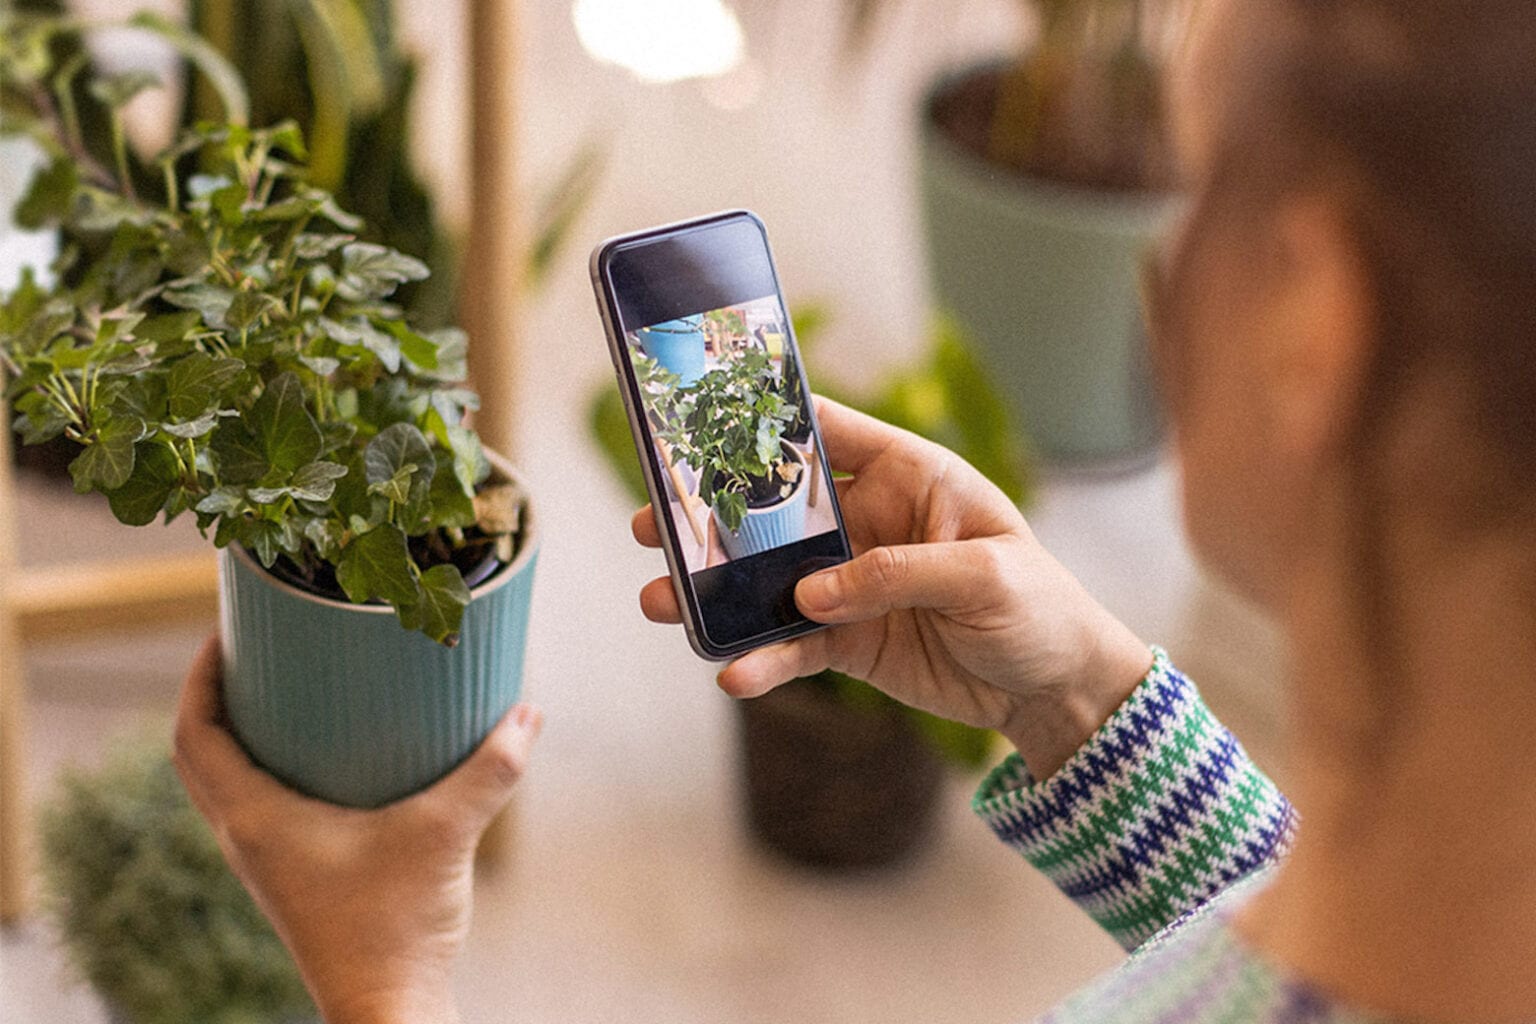 This plant care app is only $14.99, and can help you keep your greenery in their best shape.